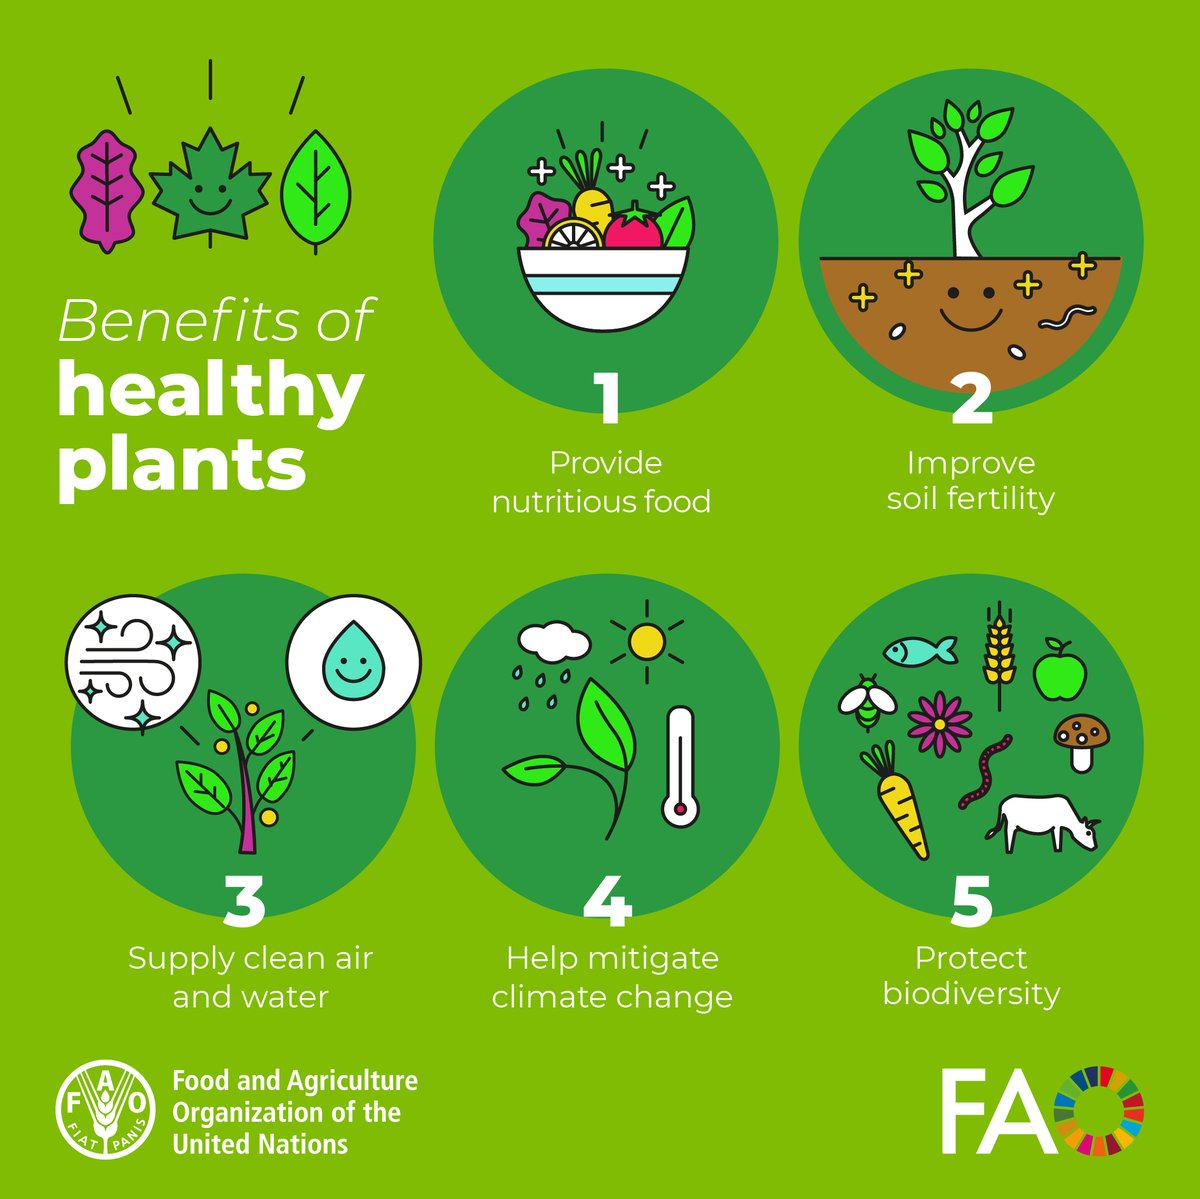 Today is #PlantHealthDay 🌱 NO plants means: 🚫NO food 🚫NO clean air 🚫NO life Protecting plants' health means protecting local flora, environment & biological diversity, economies & livelihoods More about protected species & biodiversity targets 👉 biodiversity.europa.eu